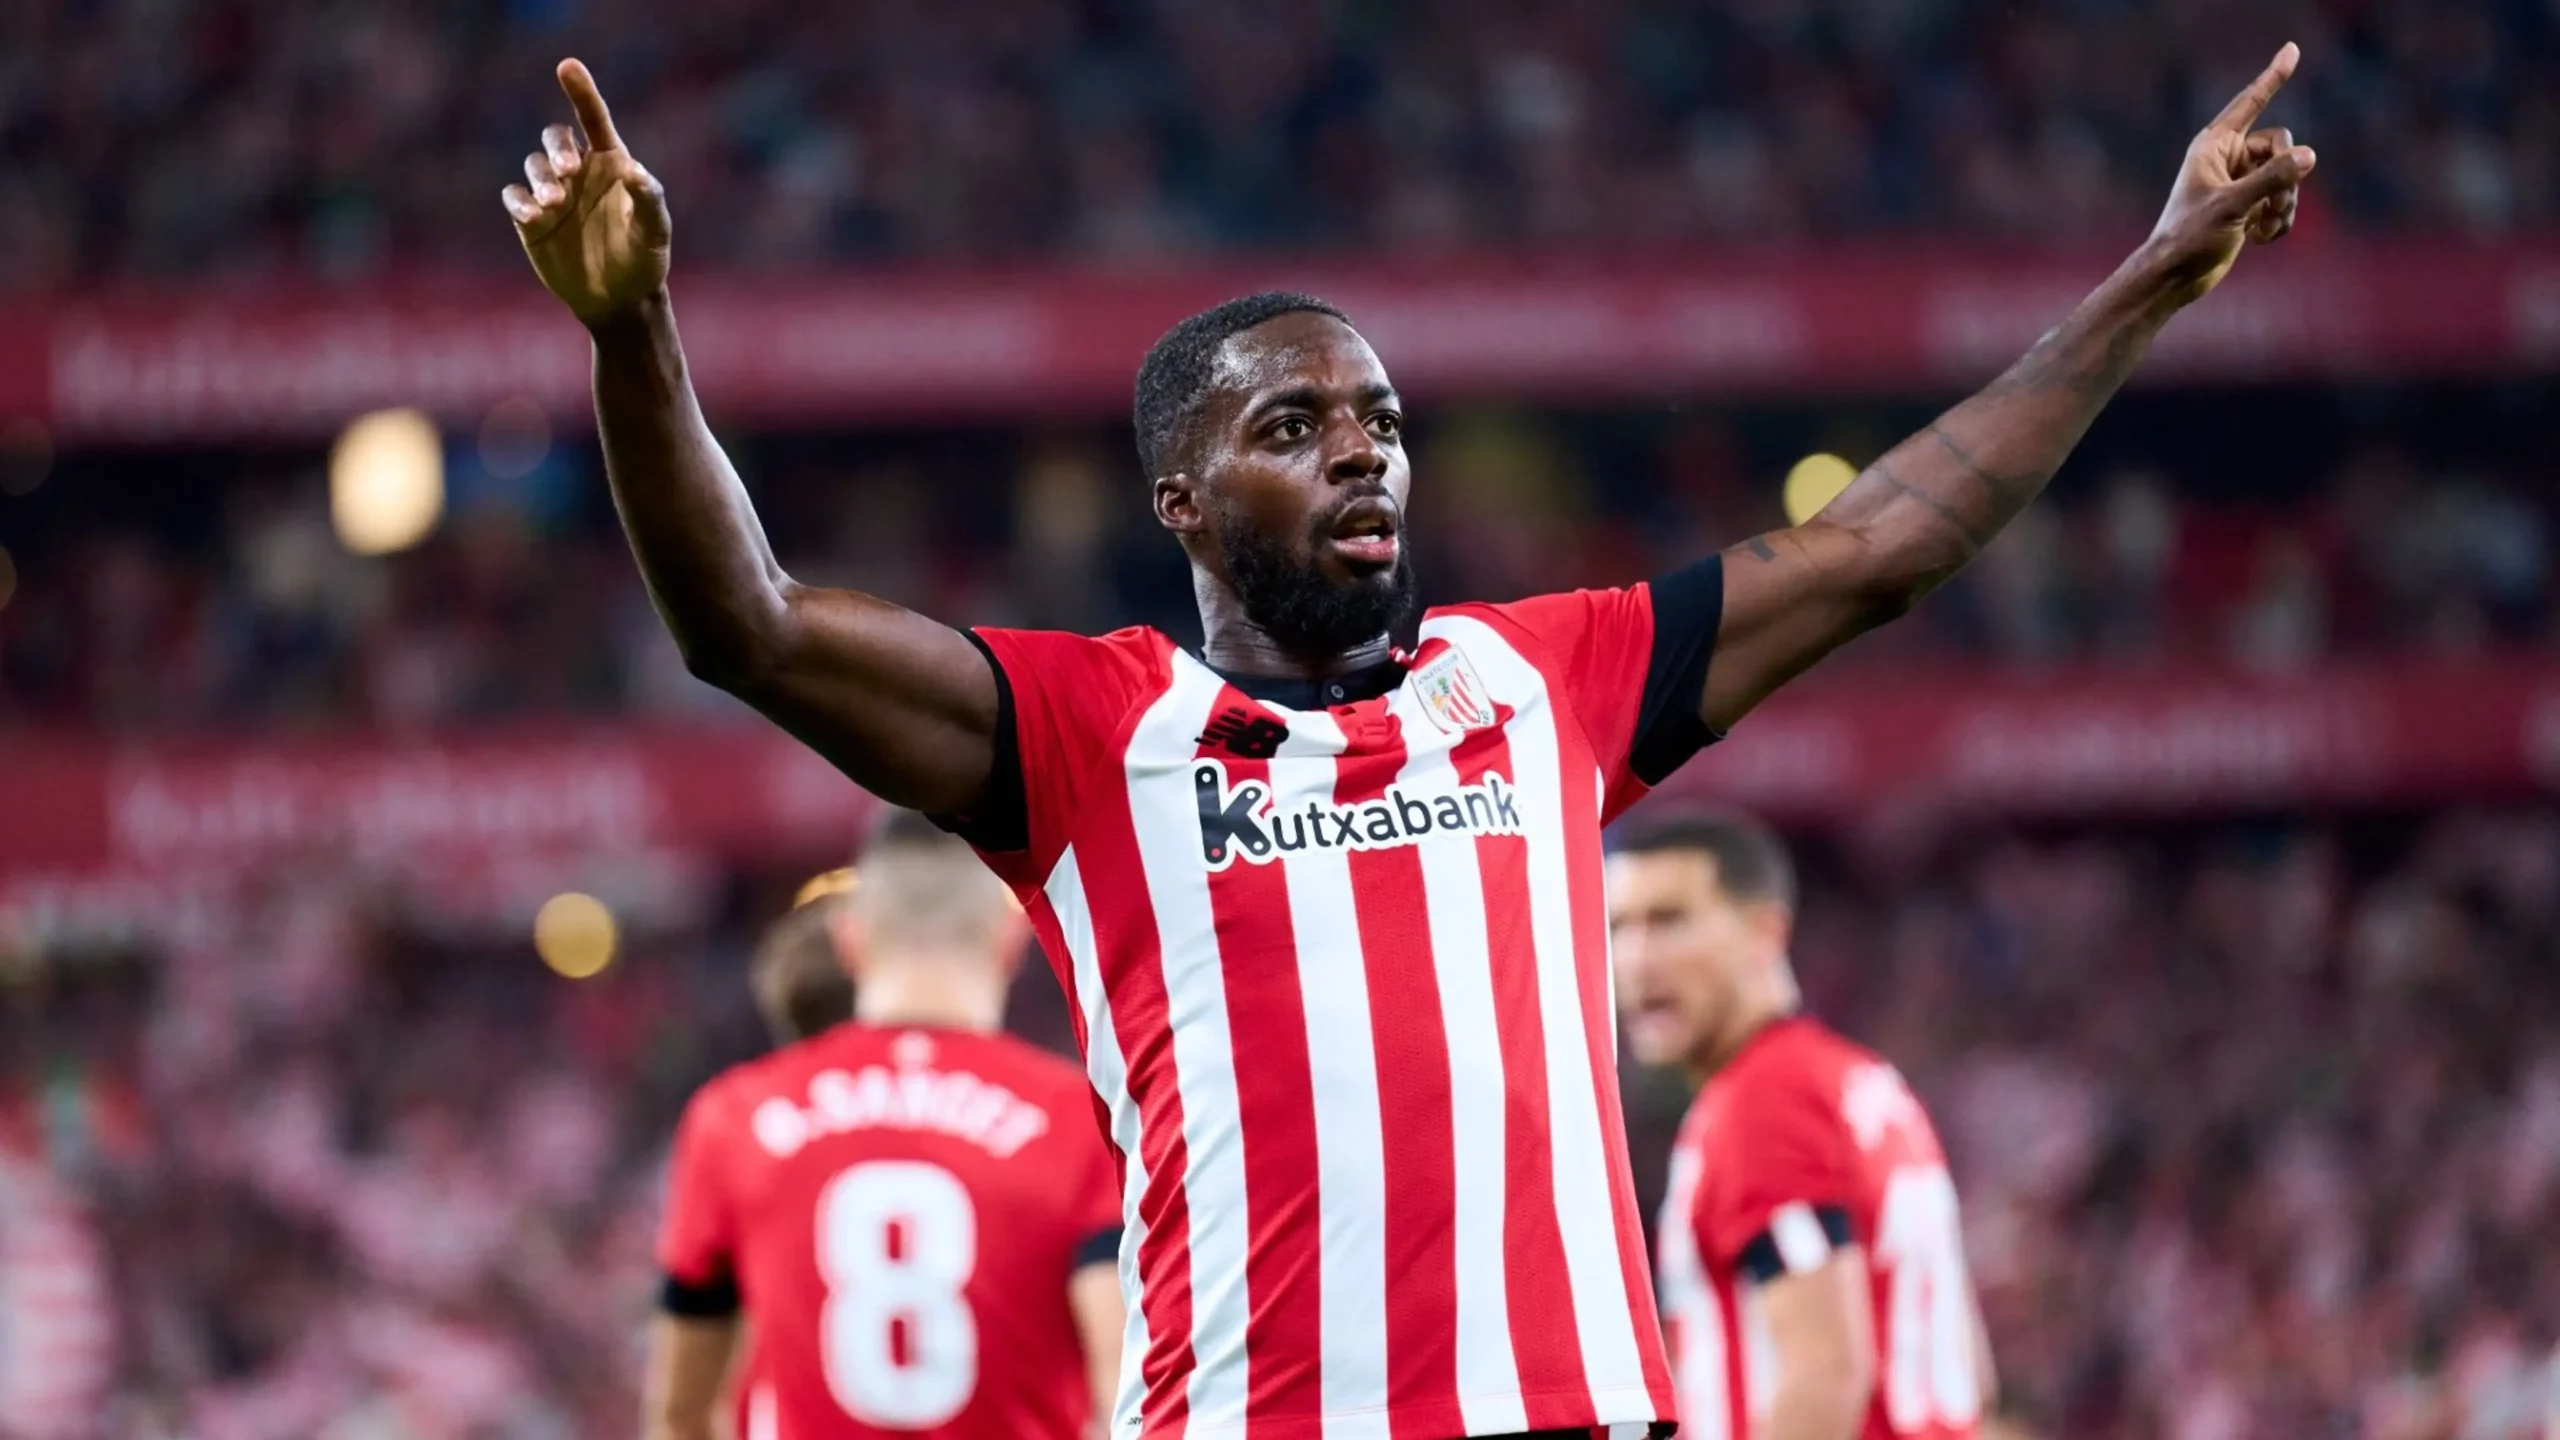 Inaki Williams: "If You Have Money Like Me, They Don't Look at Your Skin Colour"